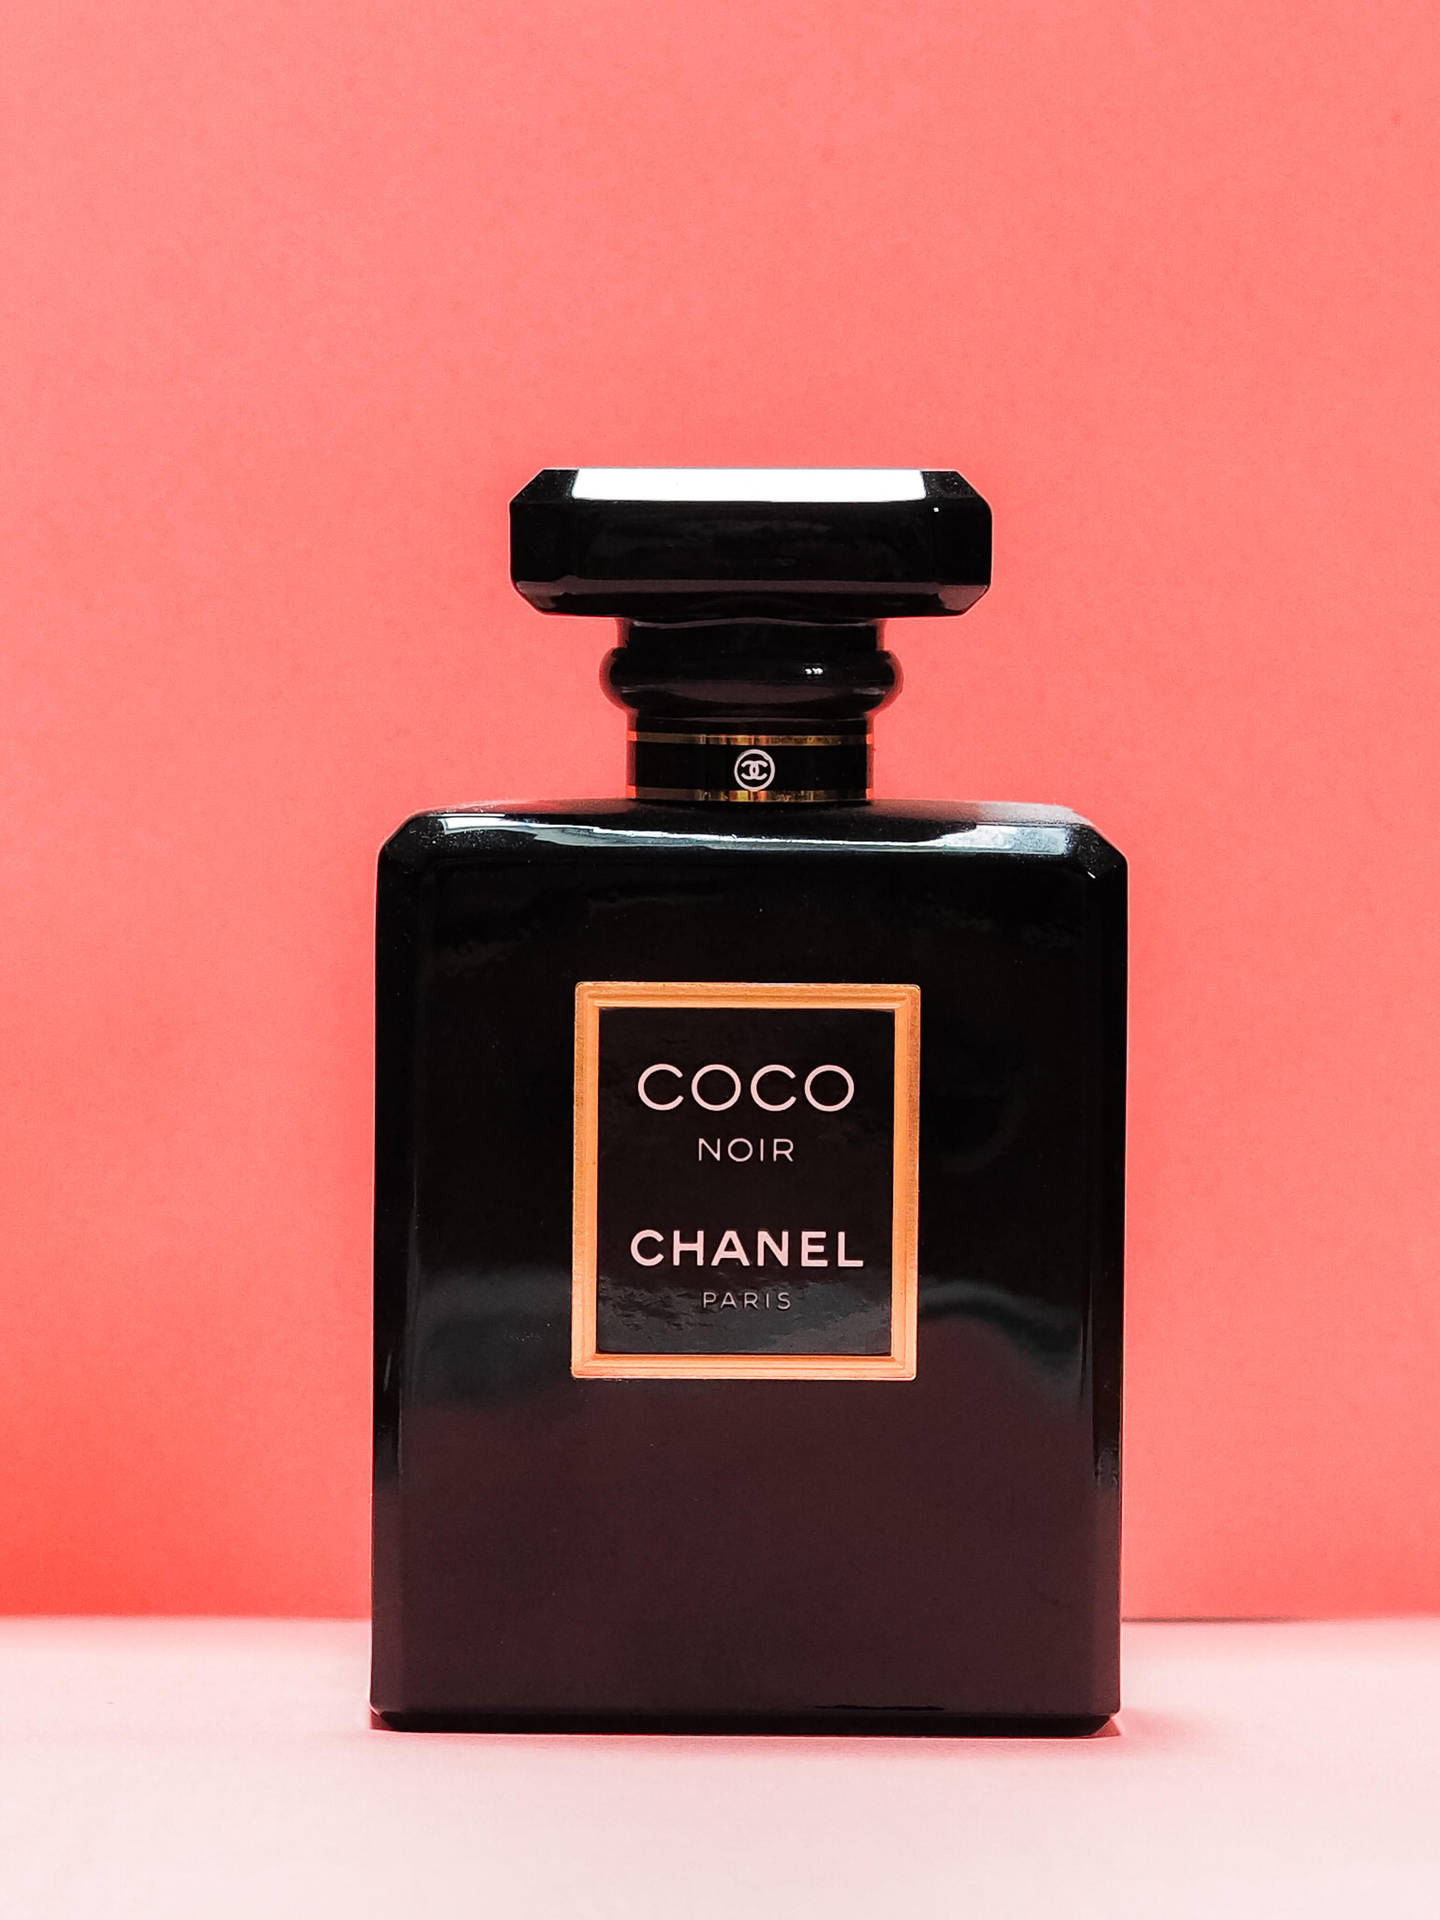 Chanel 3072X4096 Wallpaper and Background Image